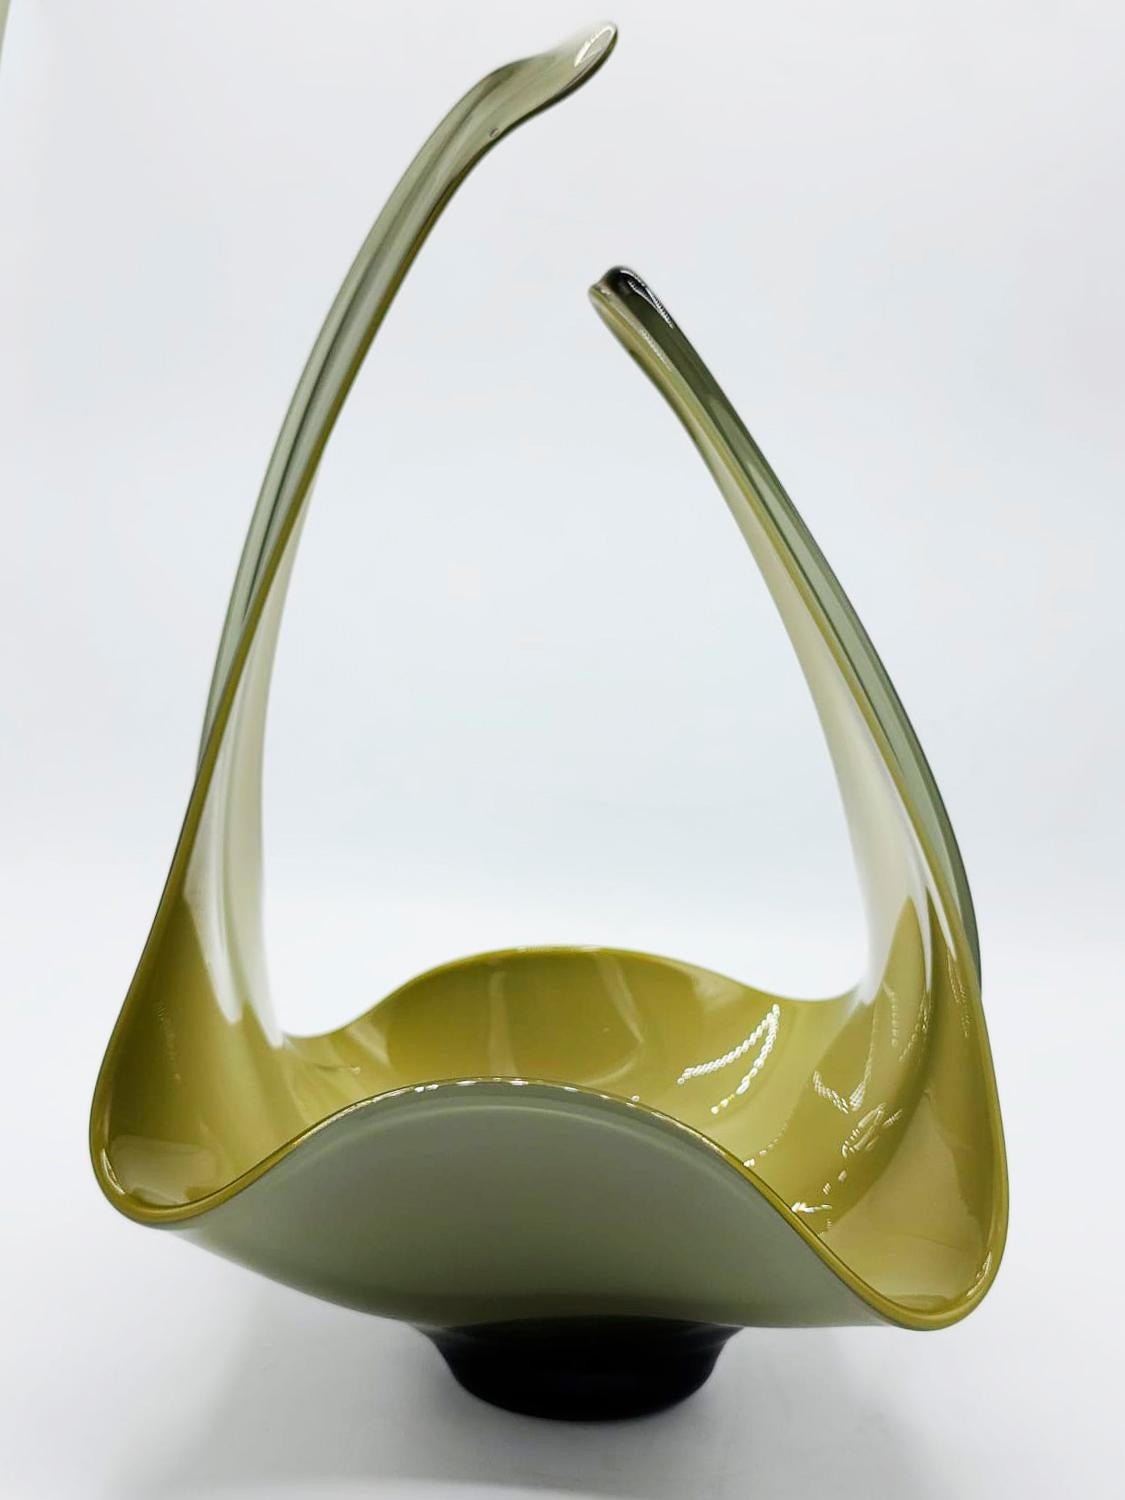 20th Century Italian modernist Murano glass vase with green tones for centerpiece For Sale